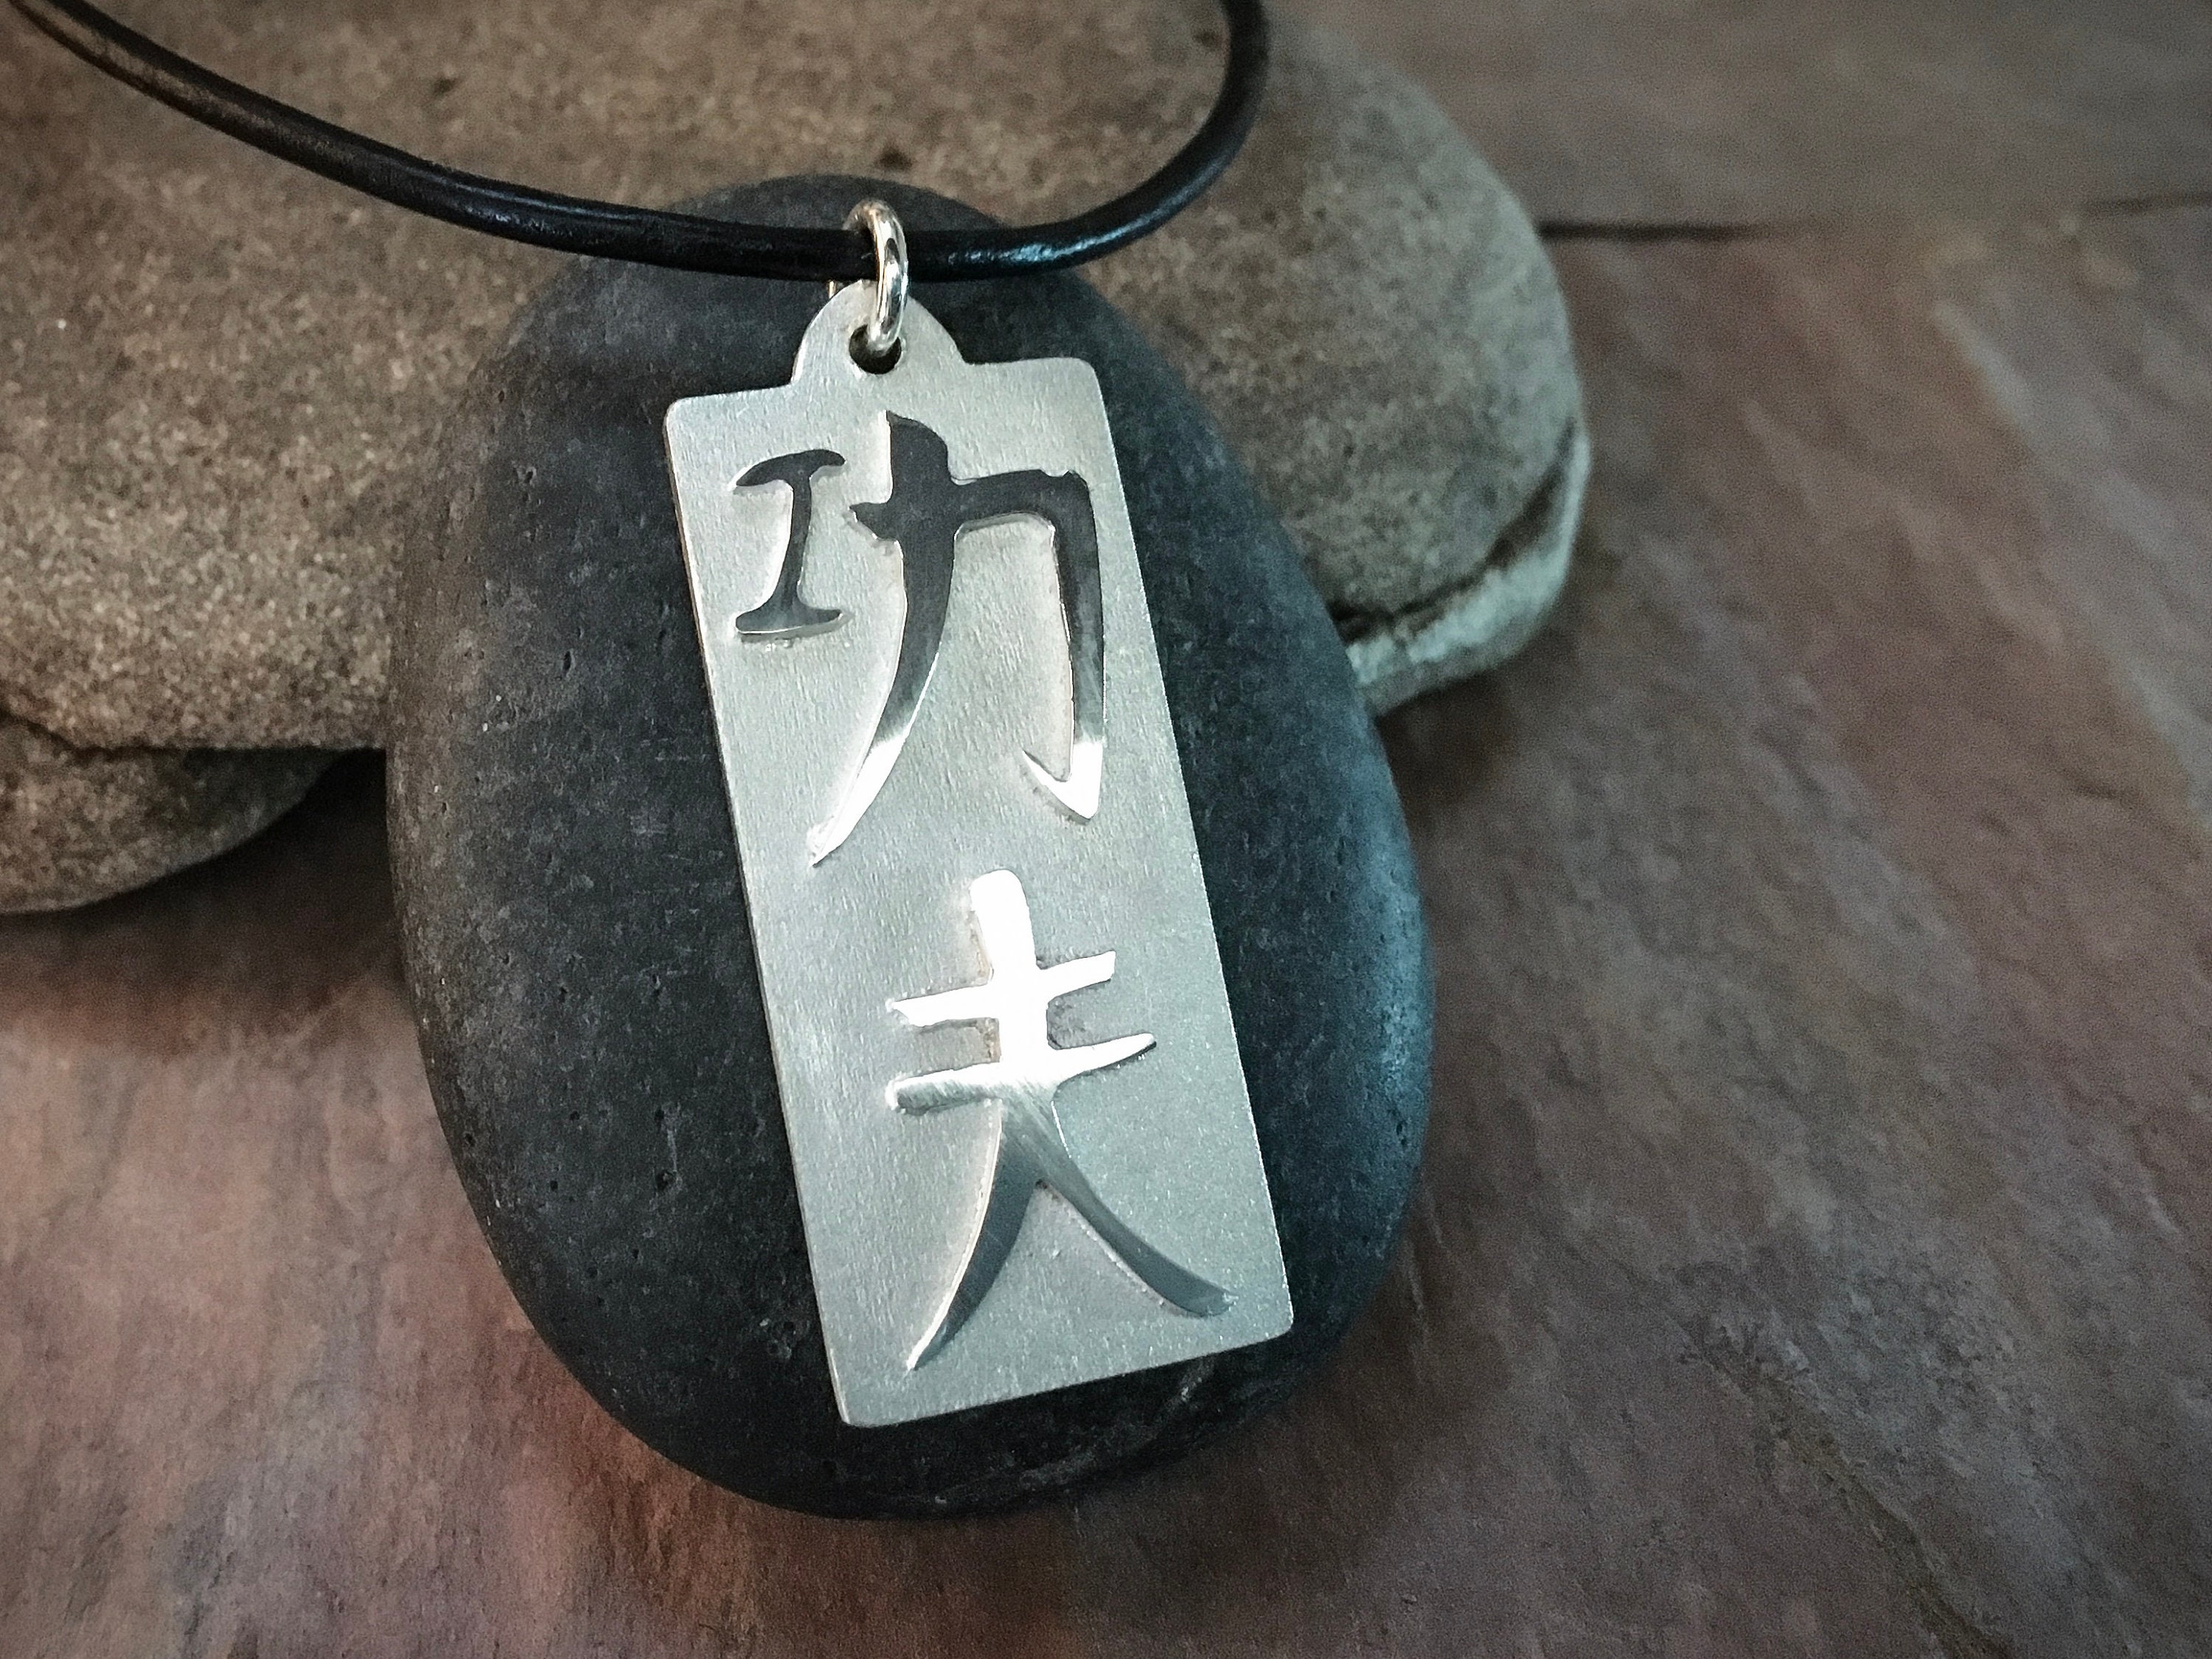 Kung Fu Pendant "Yang" in solid Sterling Silver on Leather cord - Fine jewelry gift for boyfriend, martial artist gift or birthday gift idea